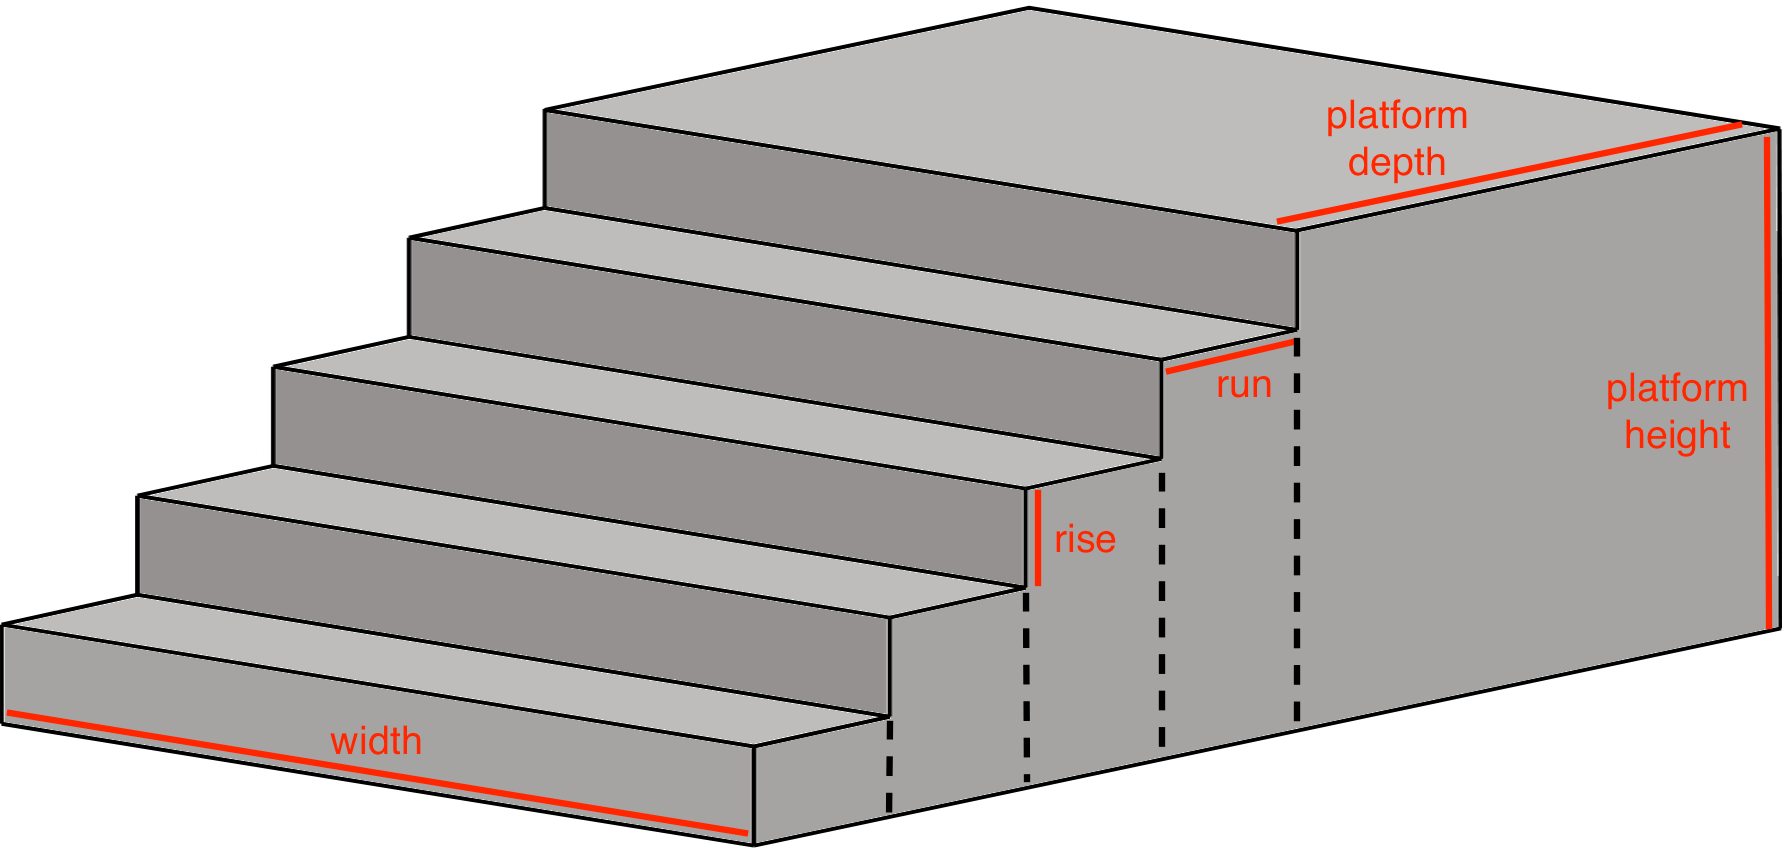 Estimating concrete for steps by breaking up the steps into smaller rectangles